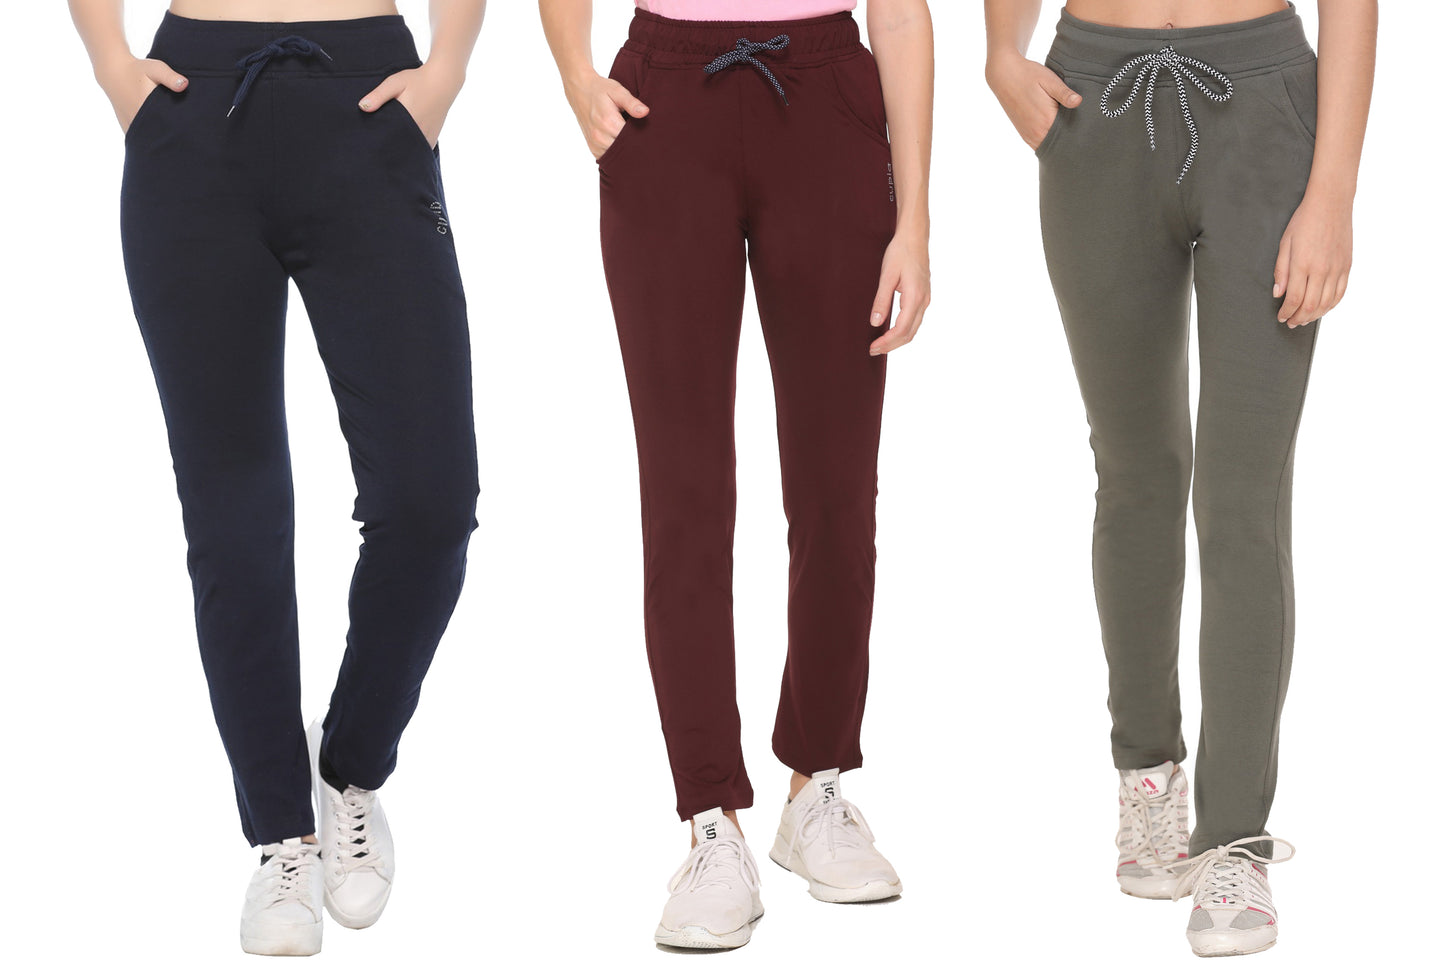 Stretchable Track Pants For Women - Cotton Lycra Activewear - Pack of 3 (Wine, Olive Green & Navy Blue)